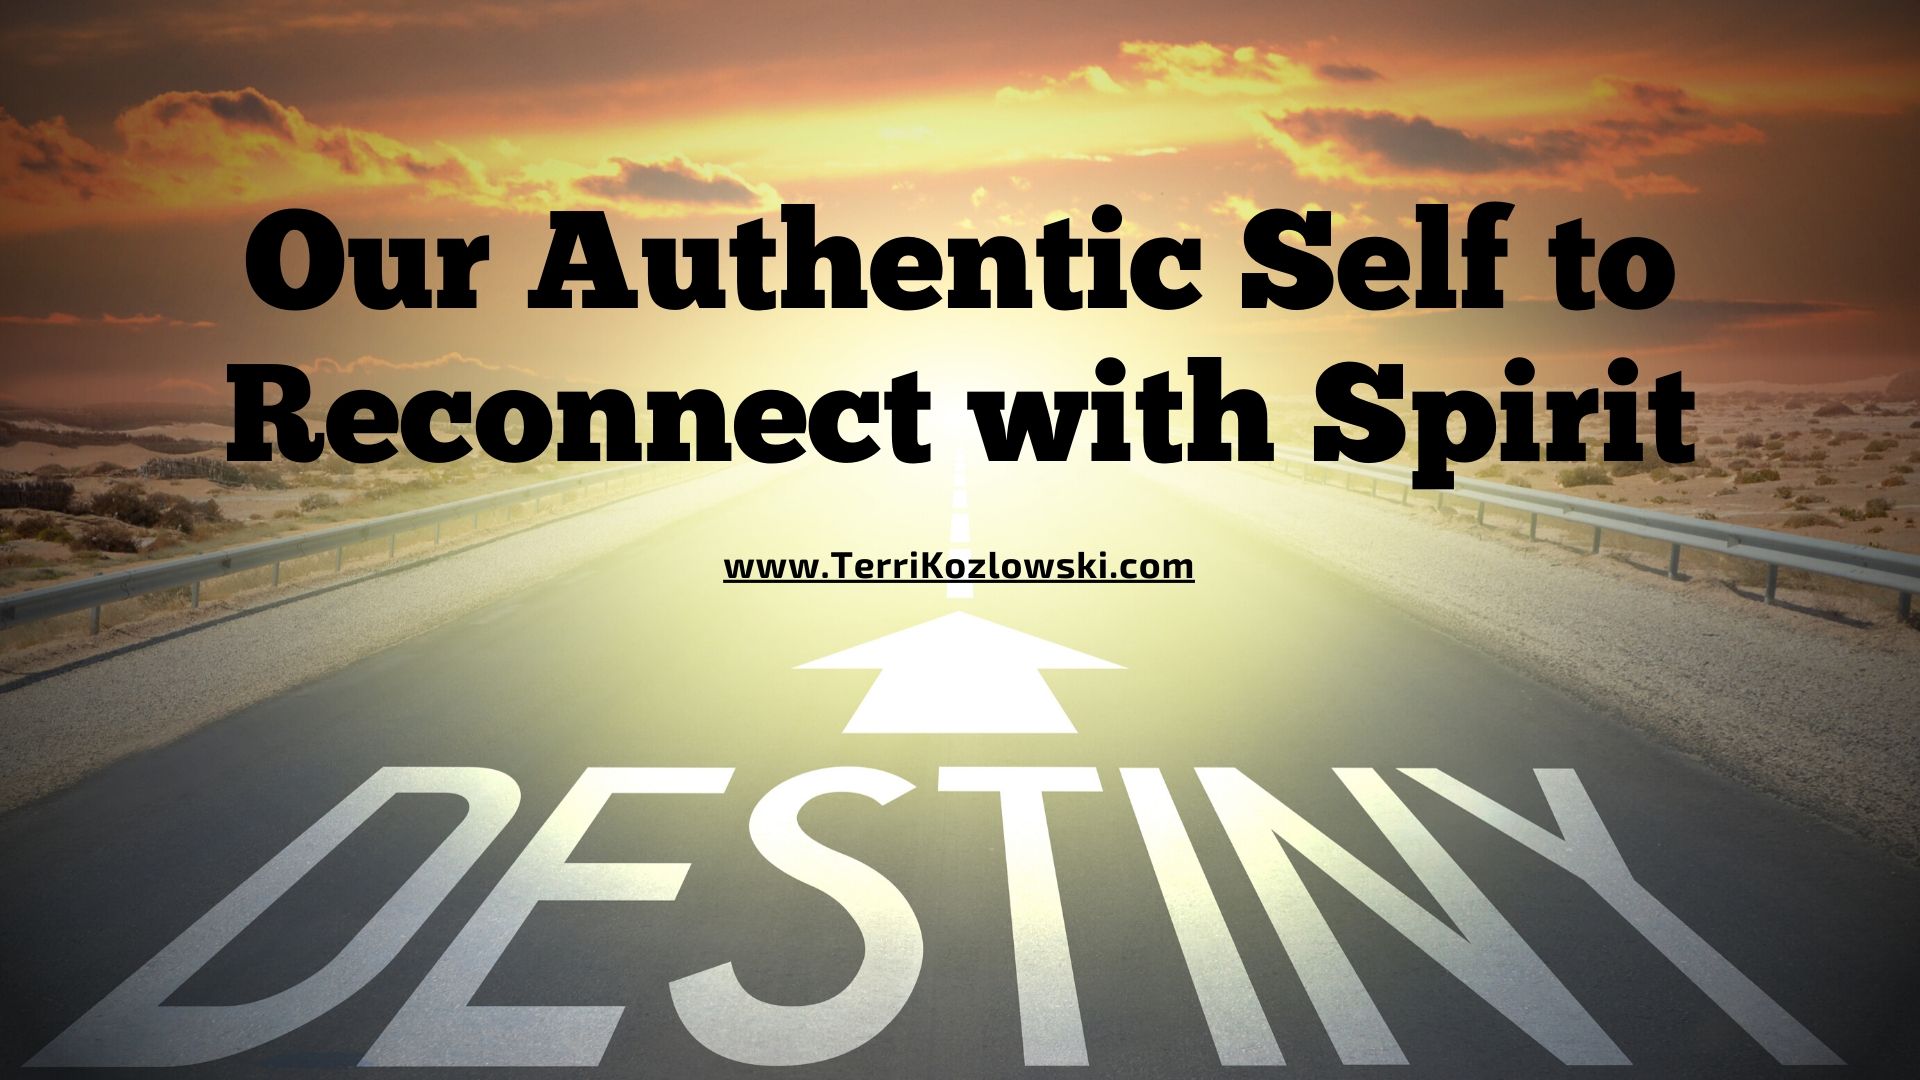 Destiny is for the Authentic Self to Reconnect with Spirit